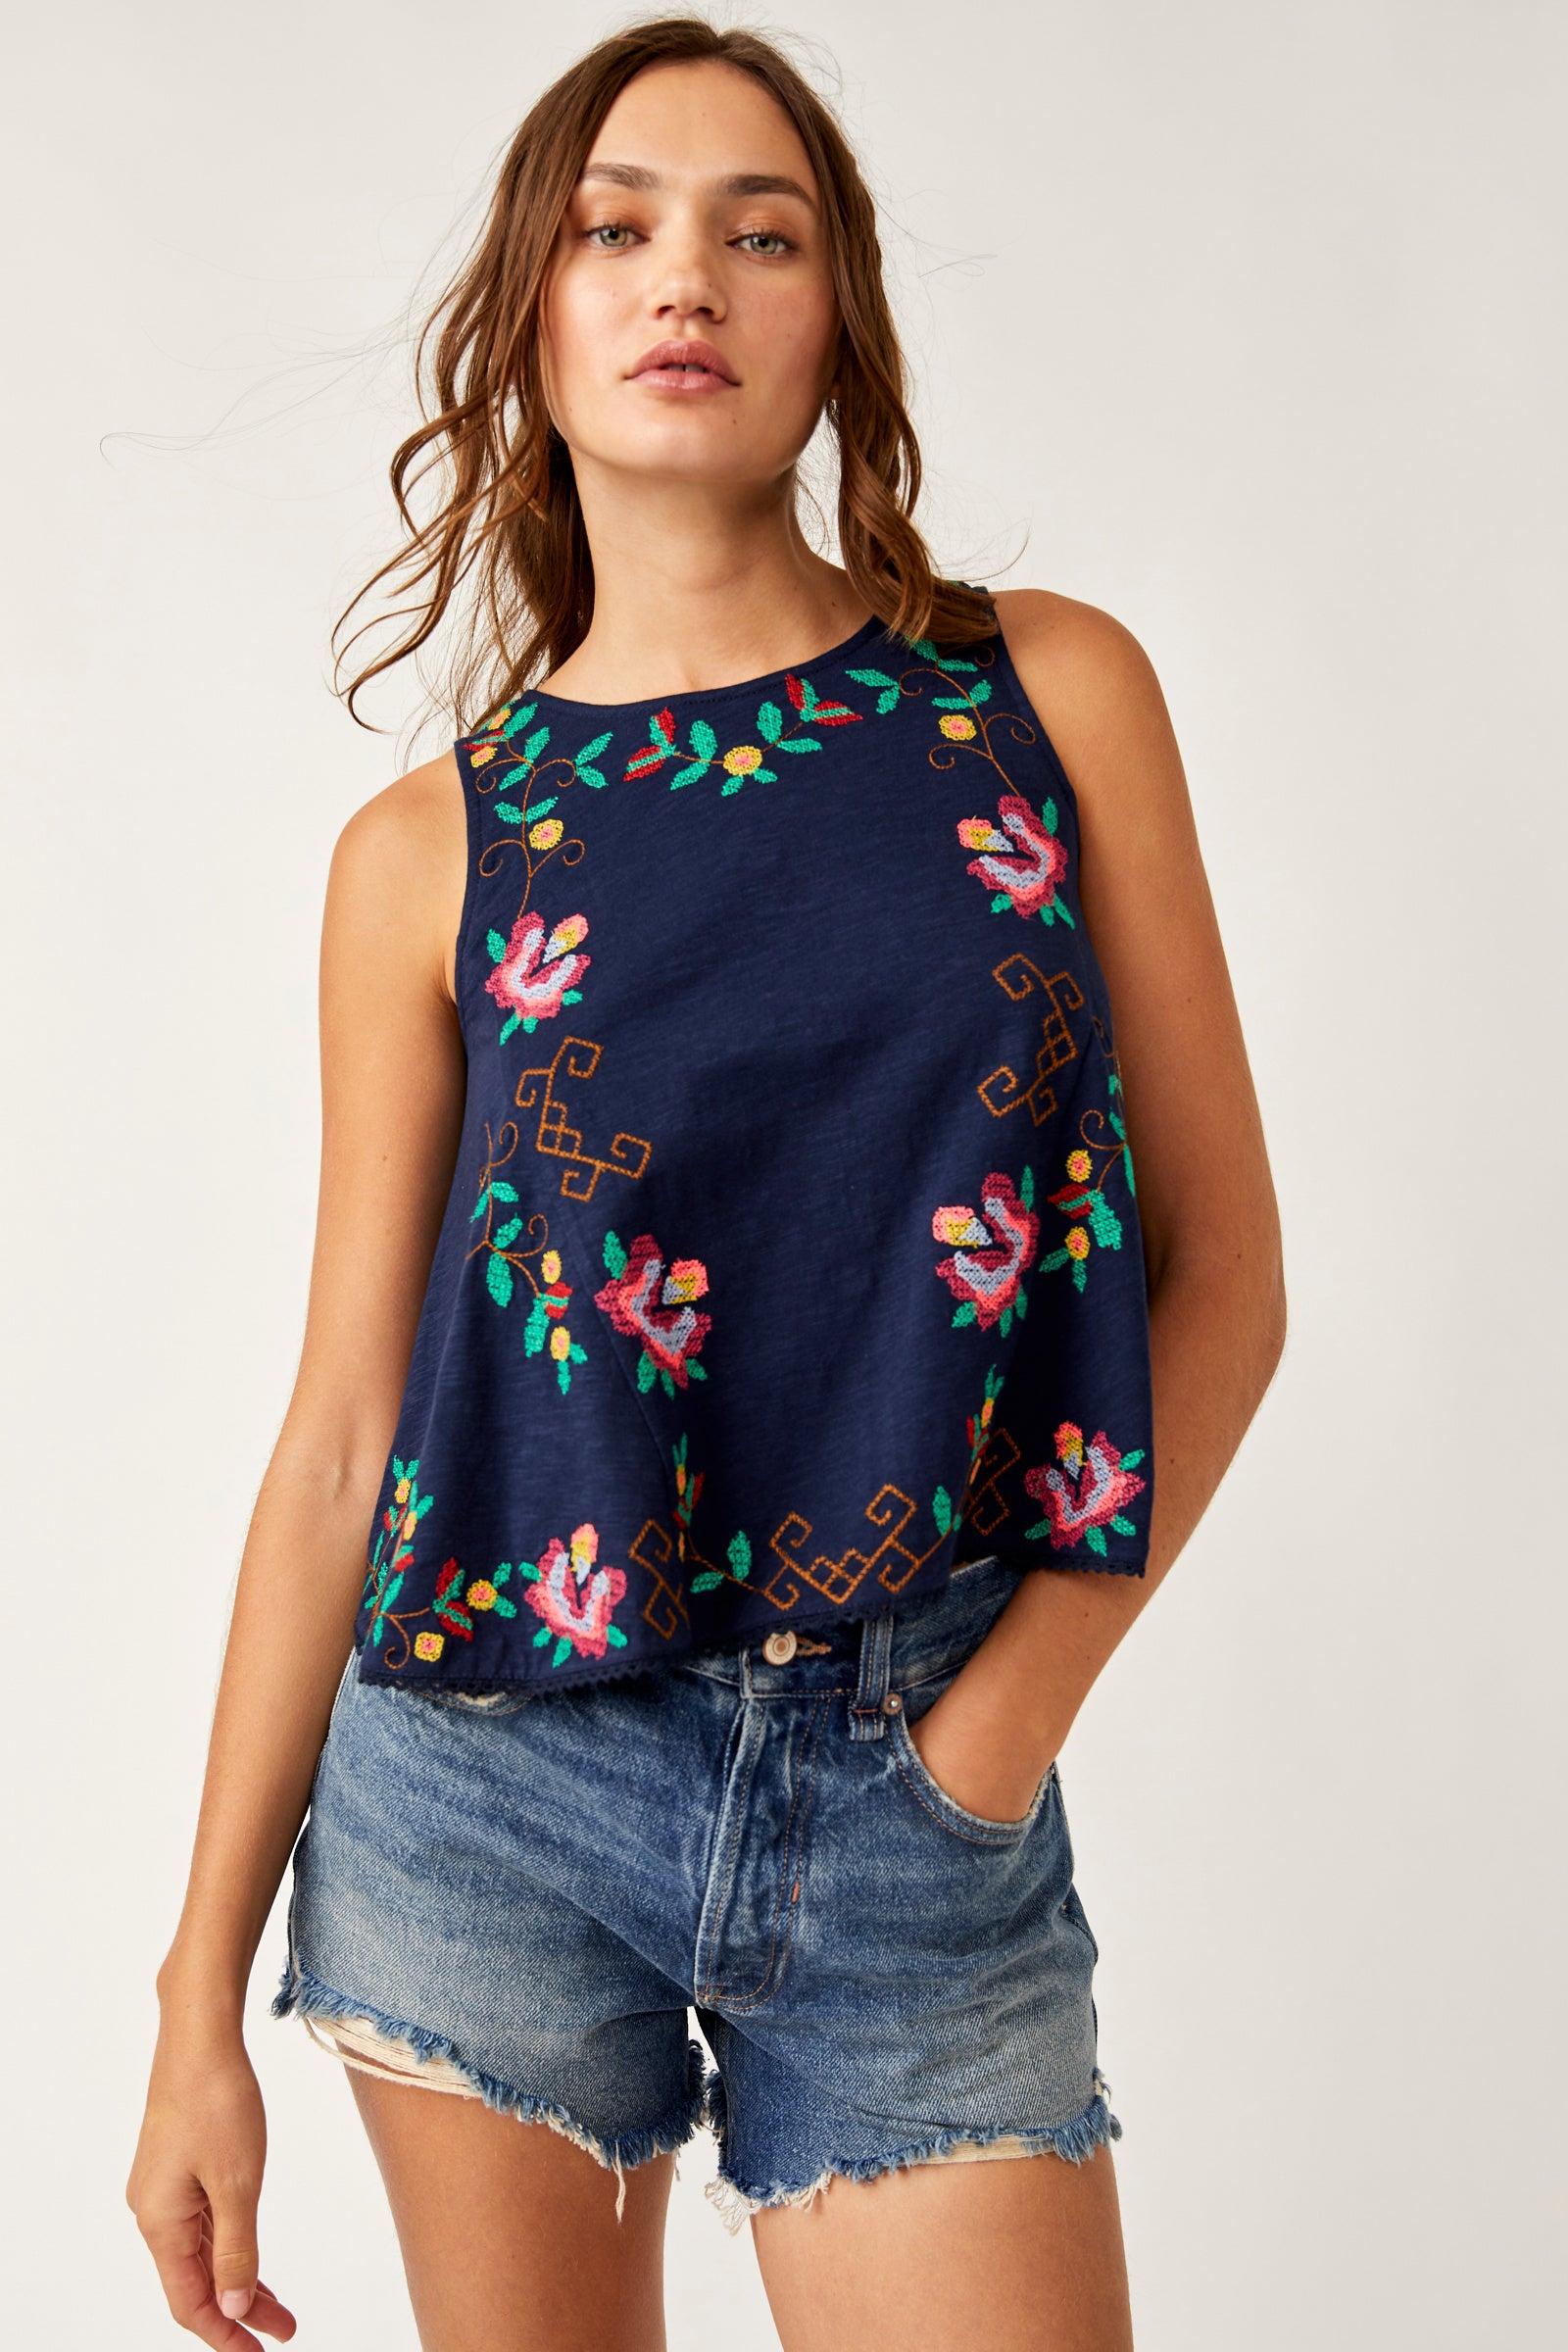 Fun and Flirty Embroidered Top